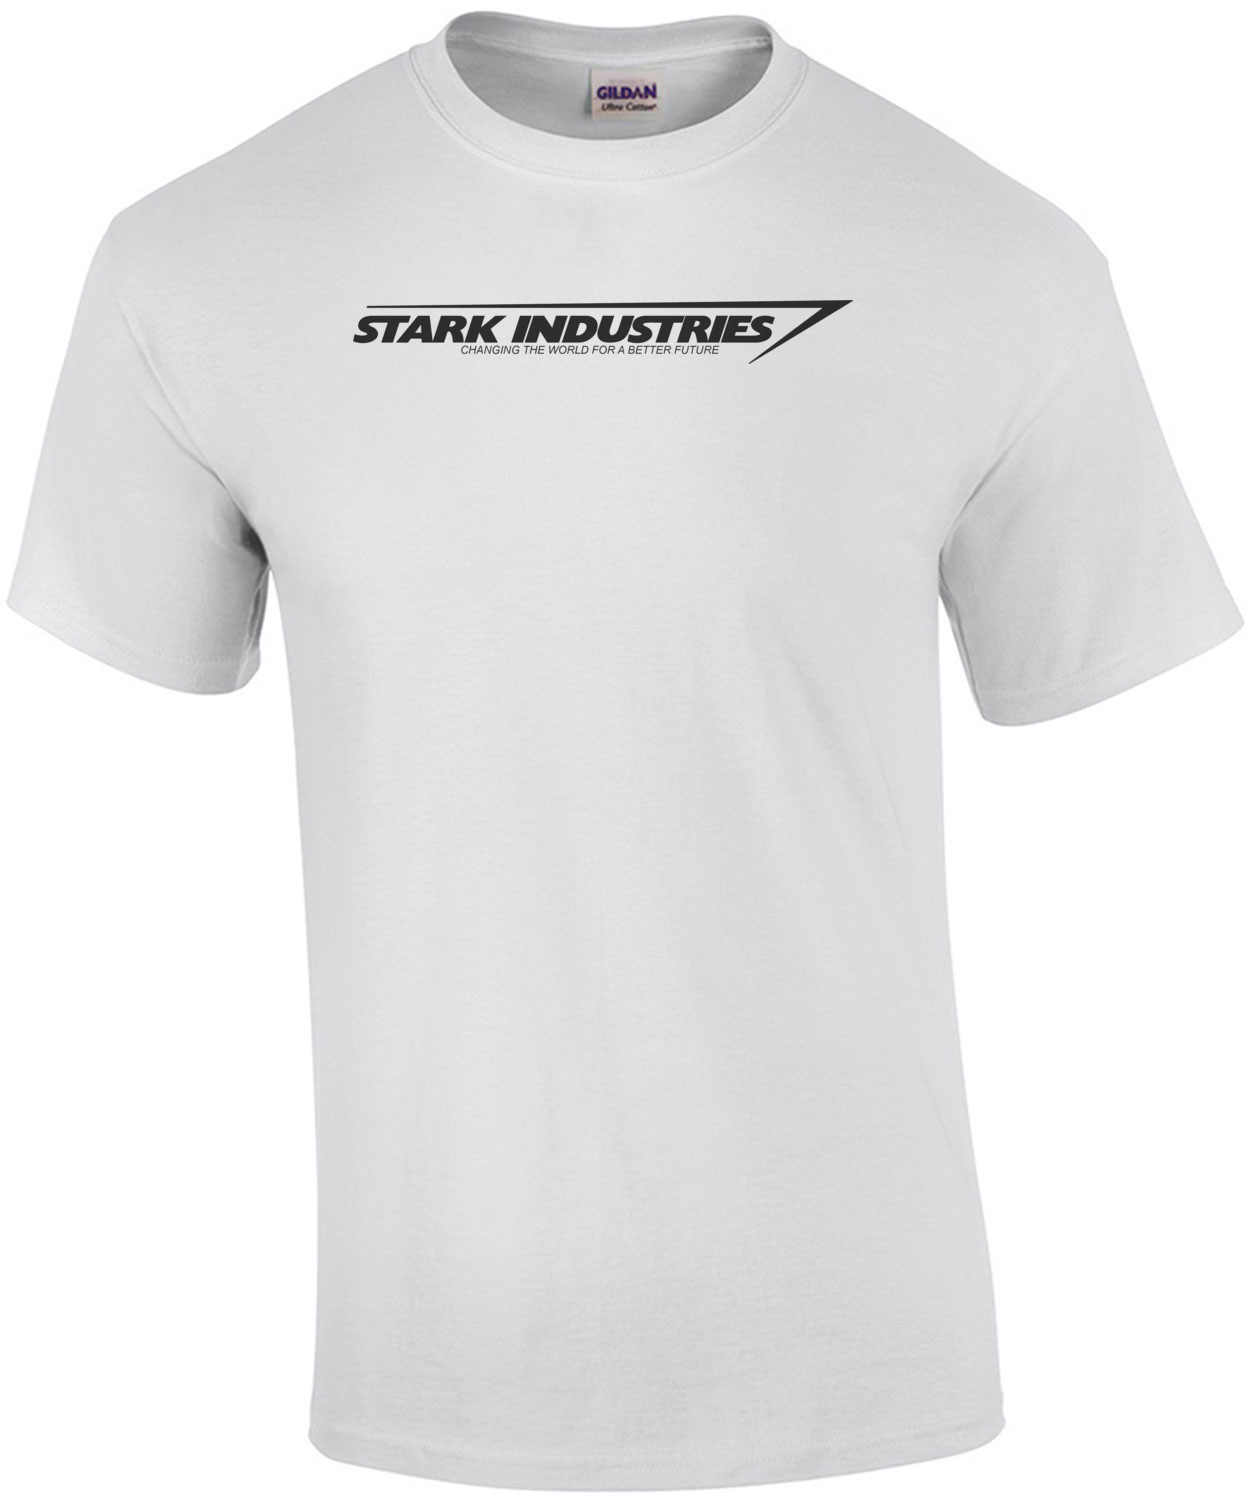 Stark Industries - Changing the world for a better future - Iron Man T-Shirt